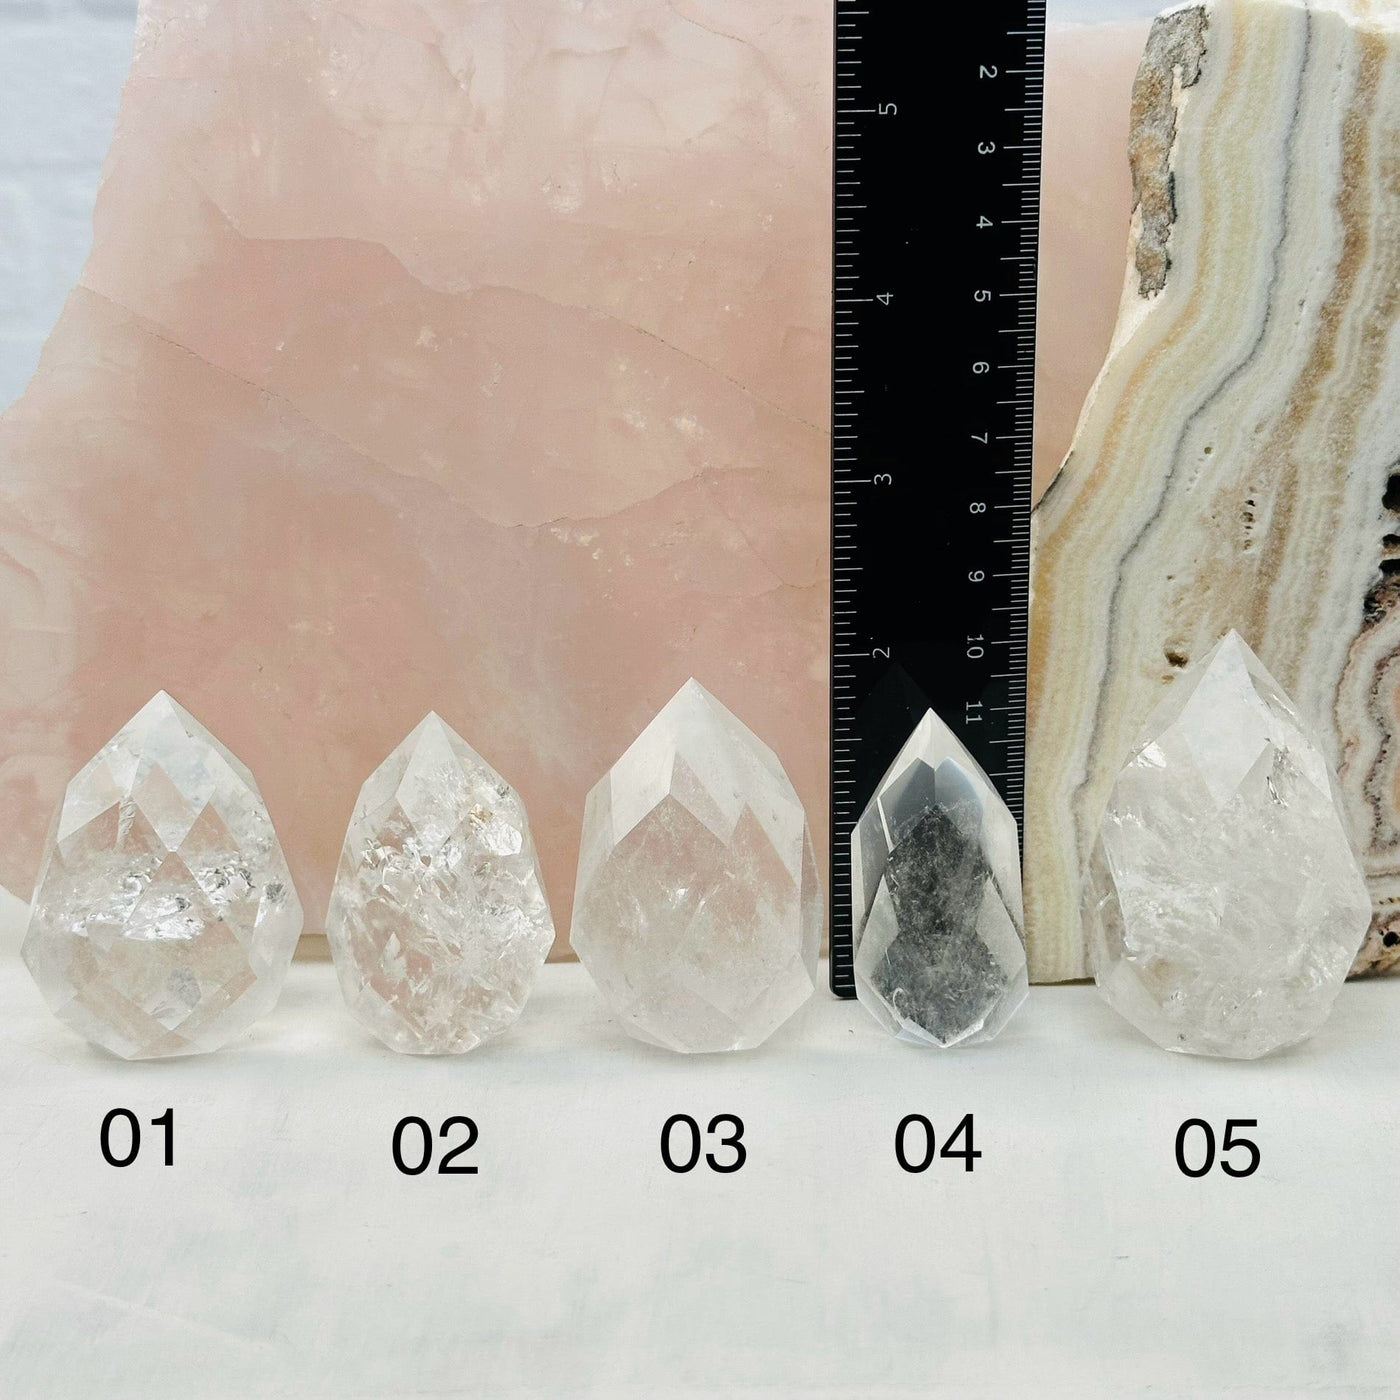 Faceted Clear Quartz Crystal Egg Point - You Choose - next to a ruler for size reference 